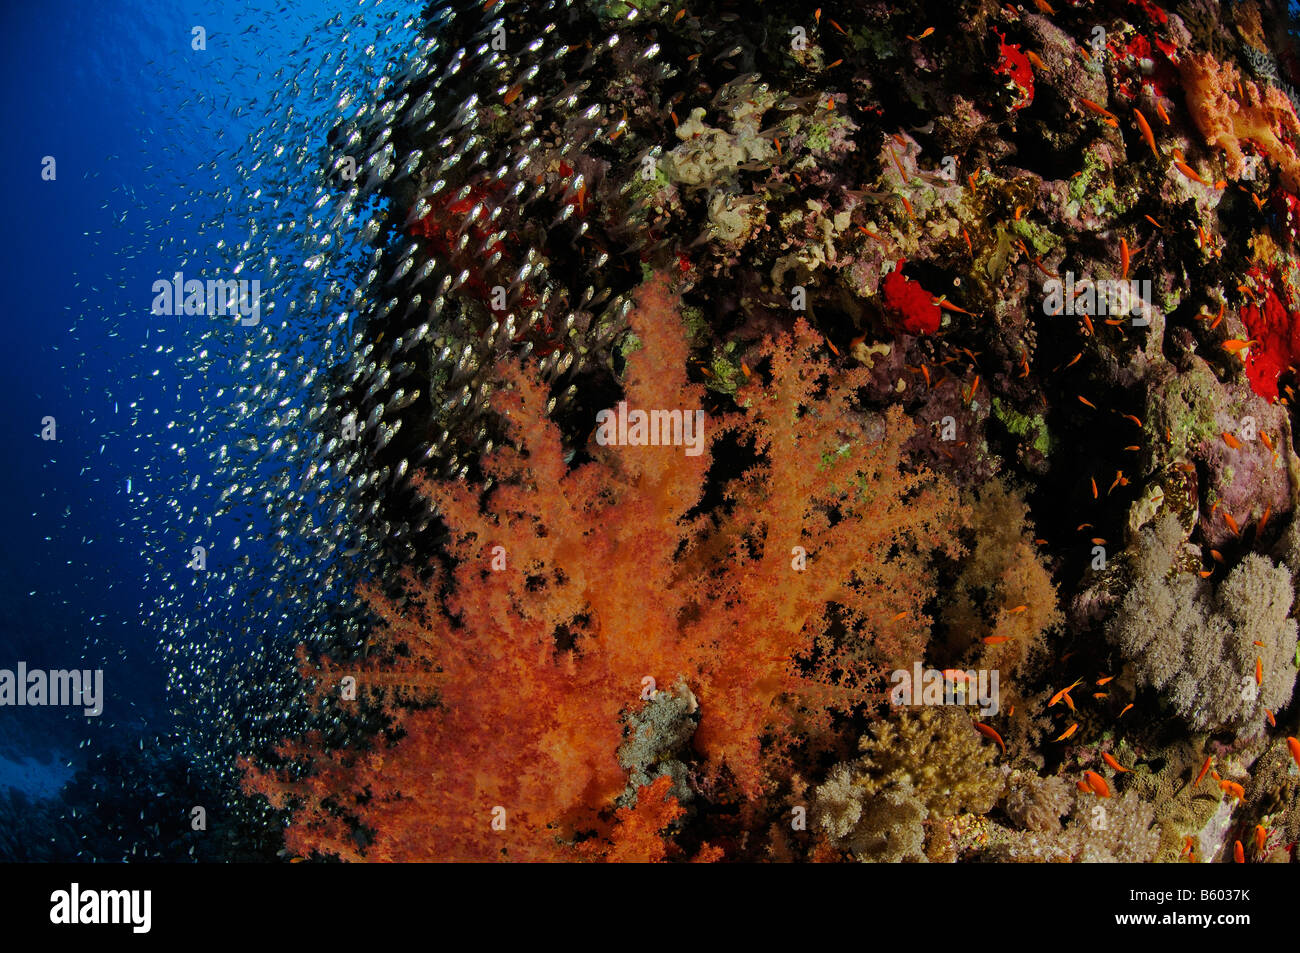 Dendronephthya hemprichi Soft corals and glassfish at coral reef, Red Sea Stock Photo